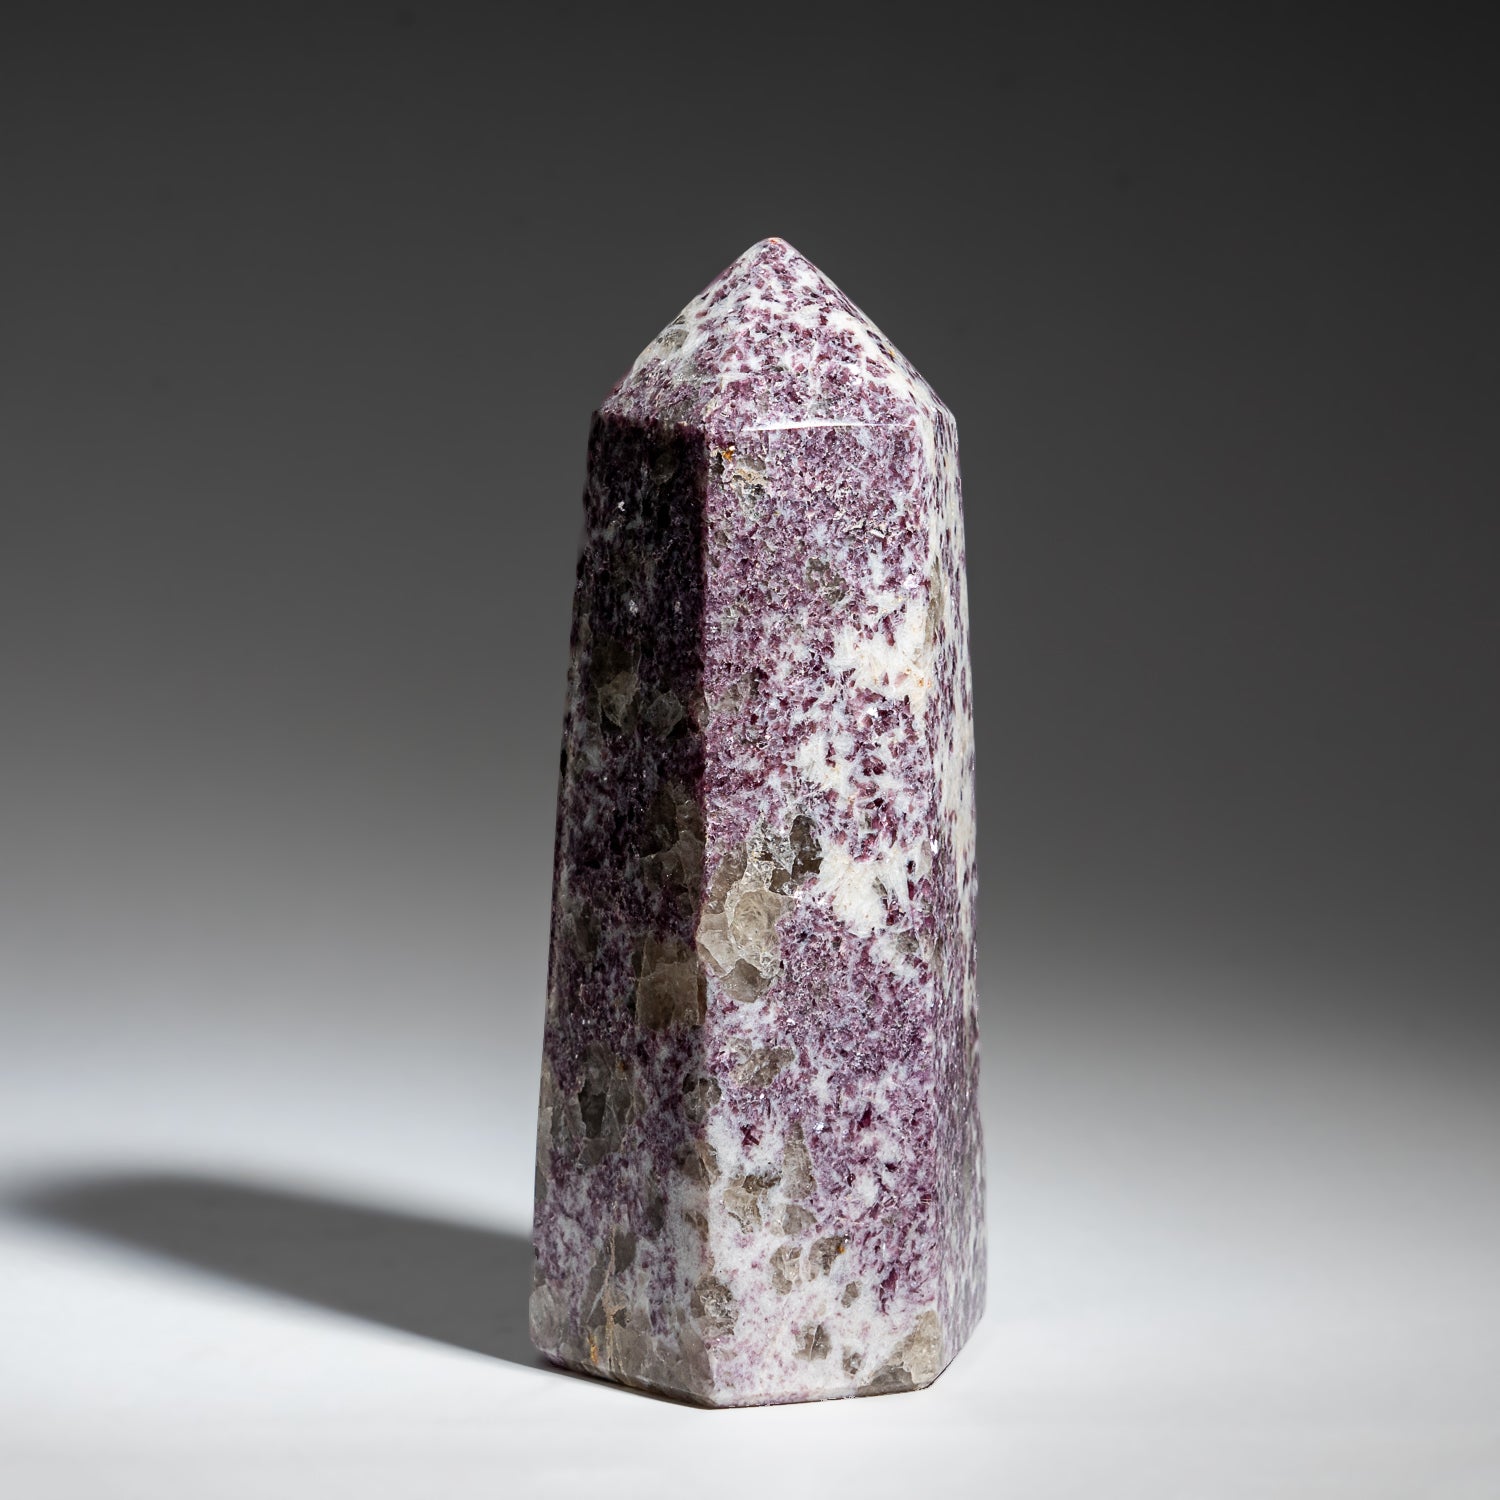 Polished Ruby in Quartz Point from India (1.3 lbs)